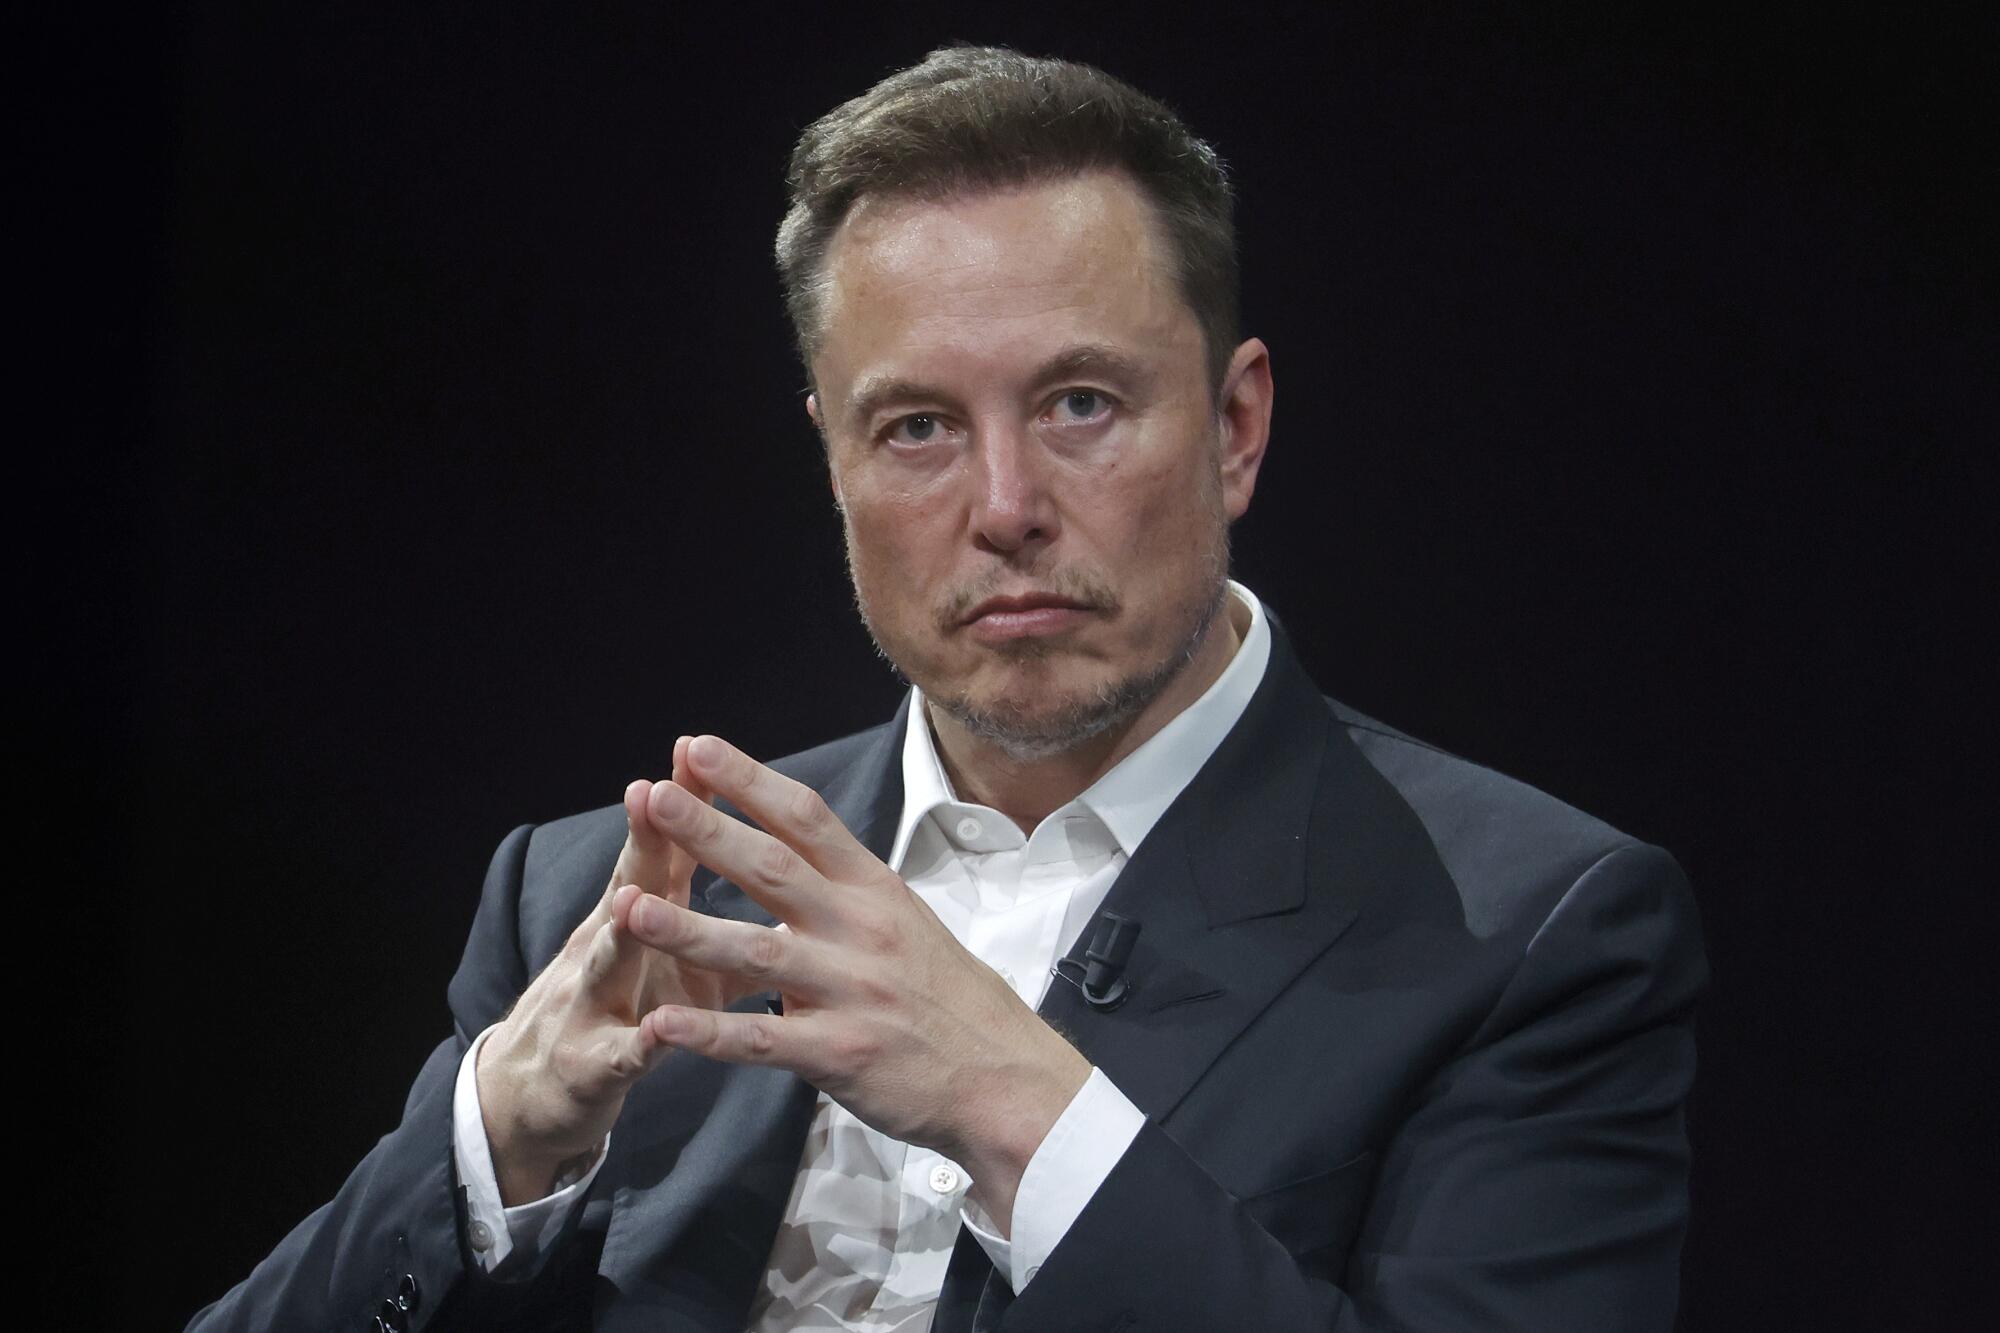 Elon Musk attends the Viva Technology conference in Paris.